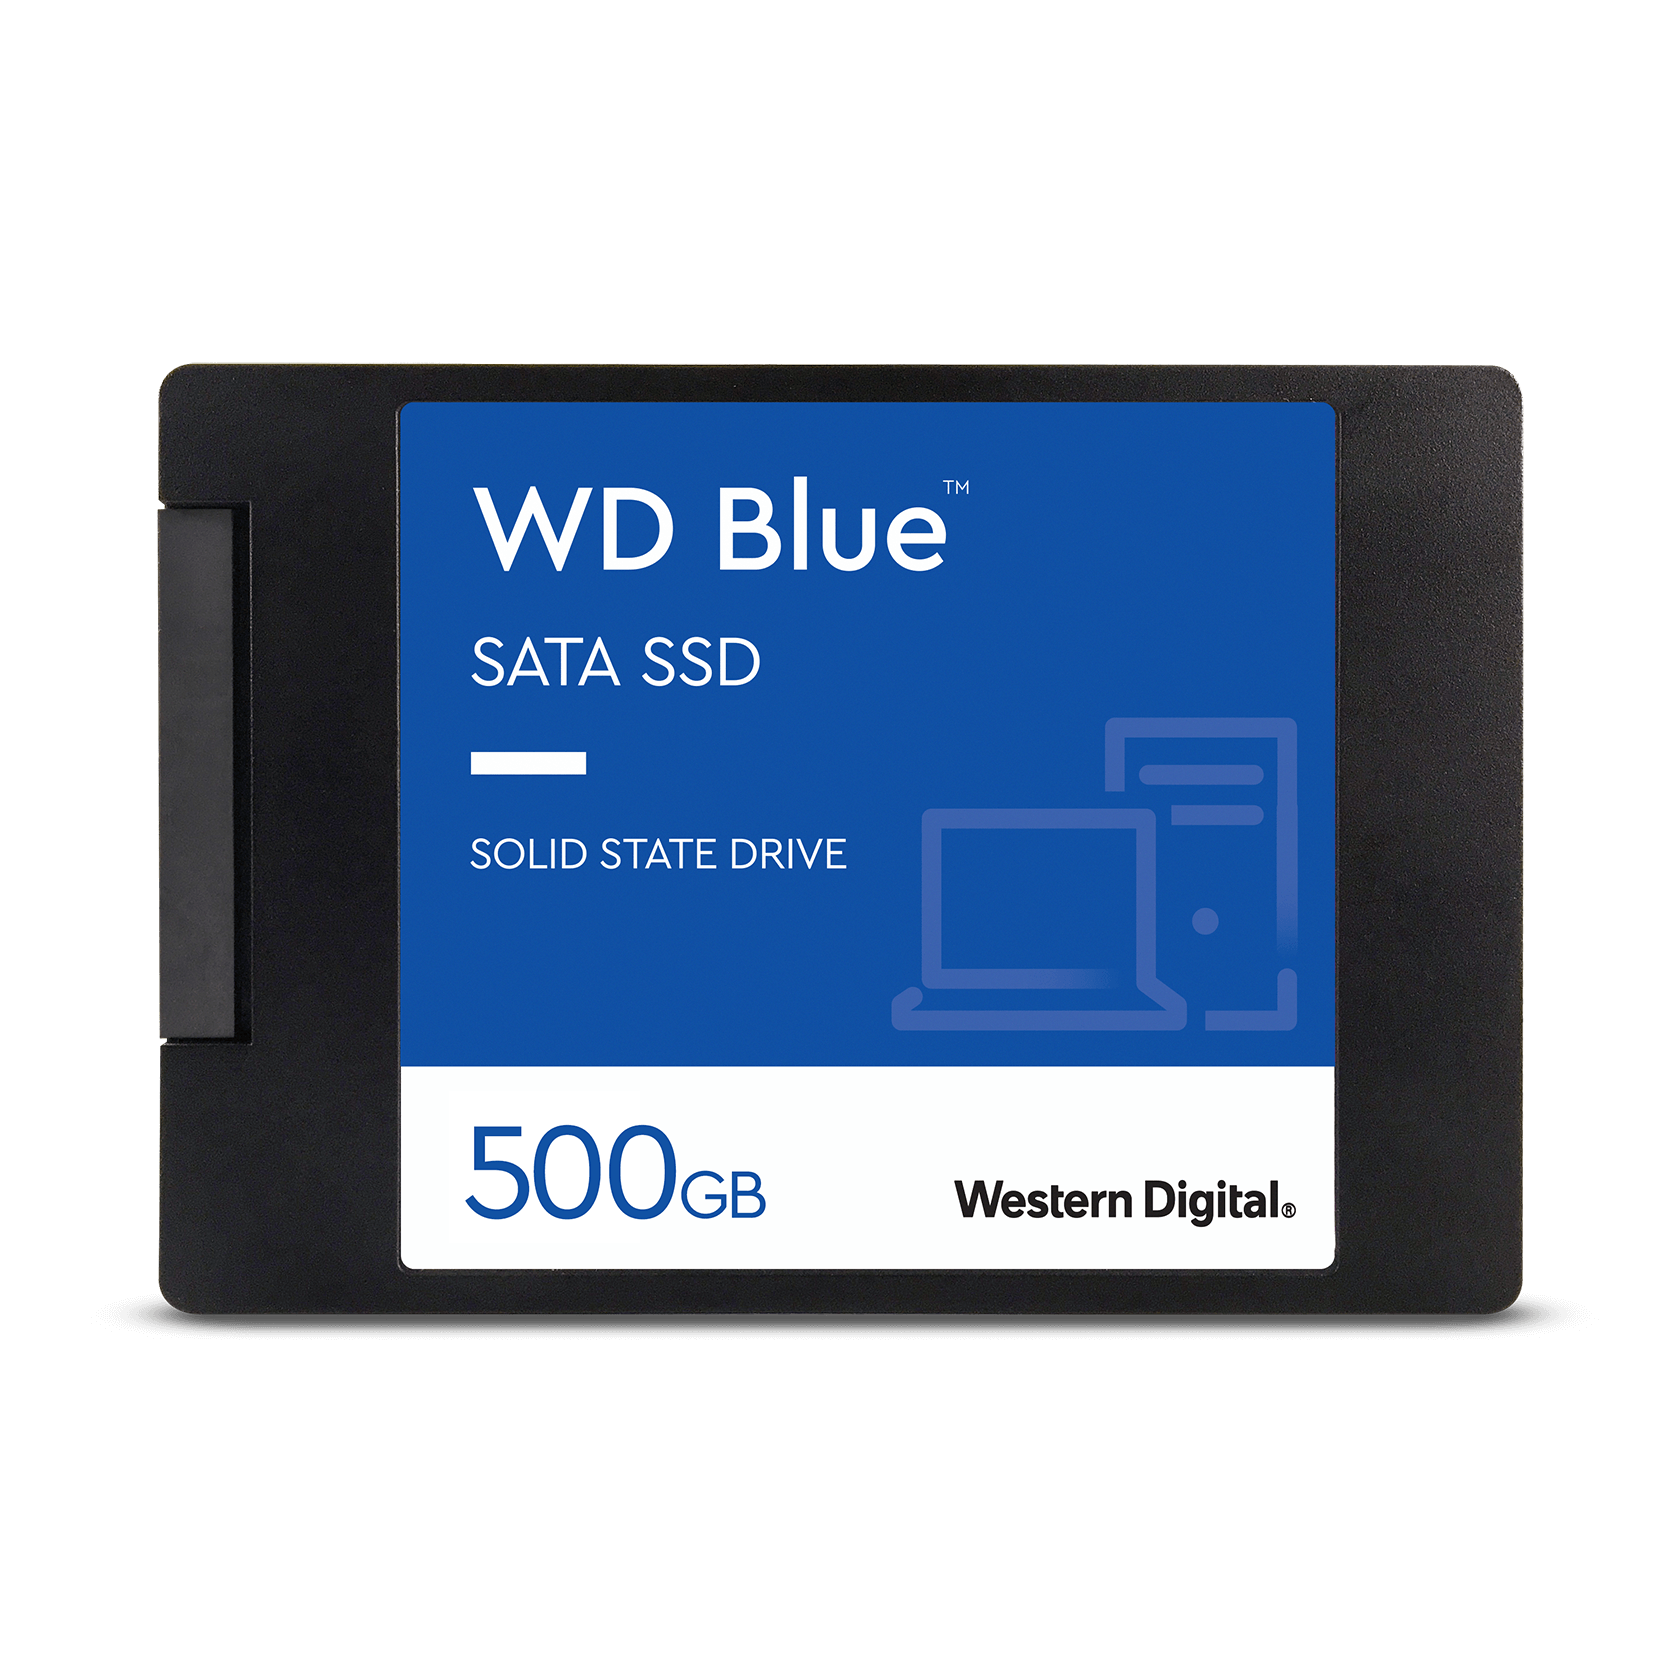 wd-blue-3d-nand-sata-ssd-500gb-front.png